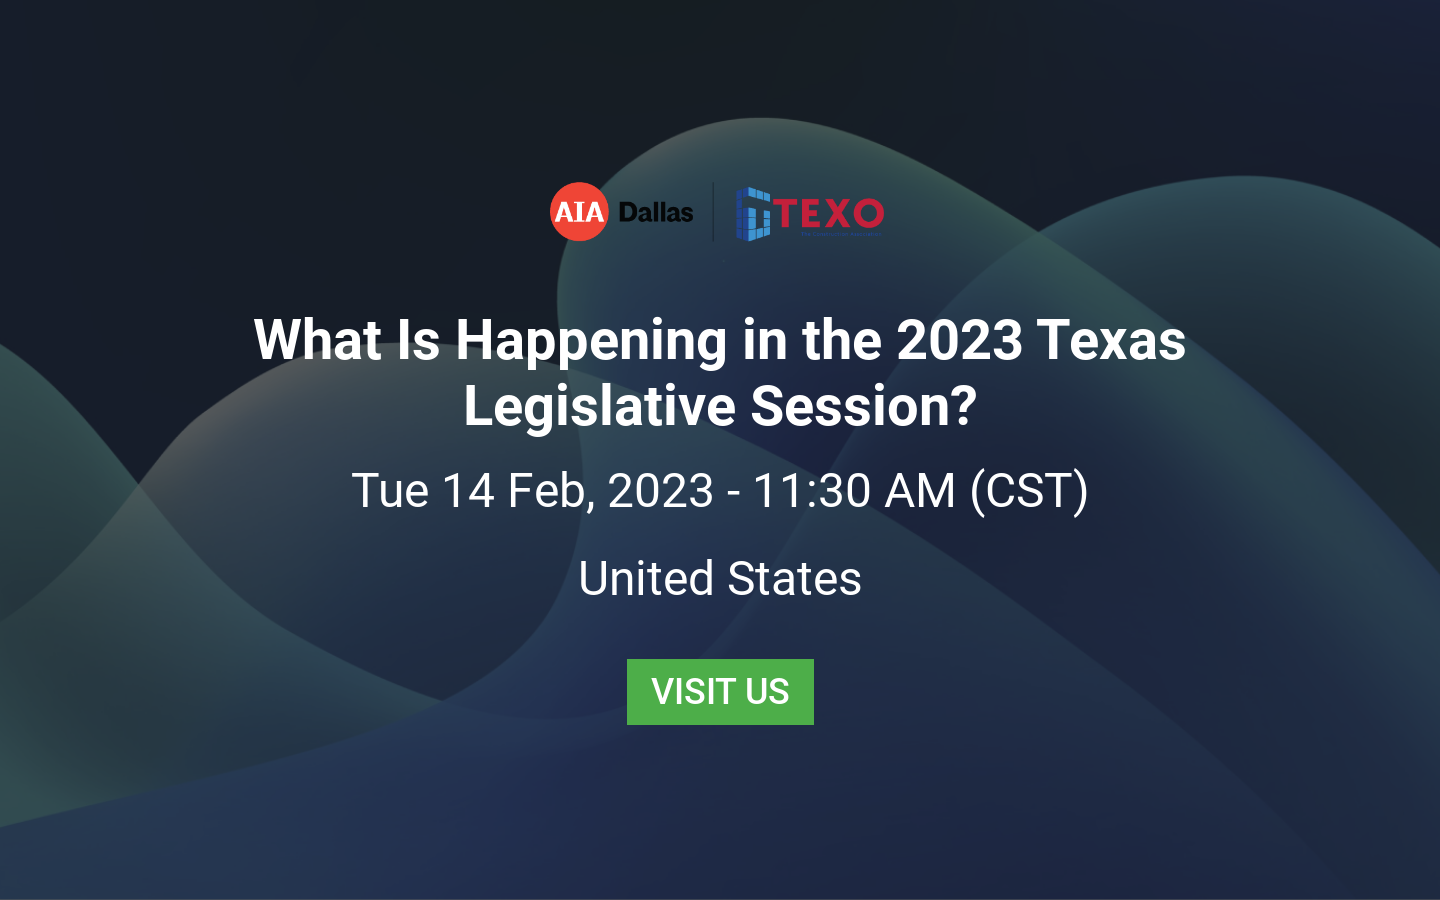 What Is Happening in the 2023 Texas Legislative Session?